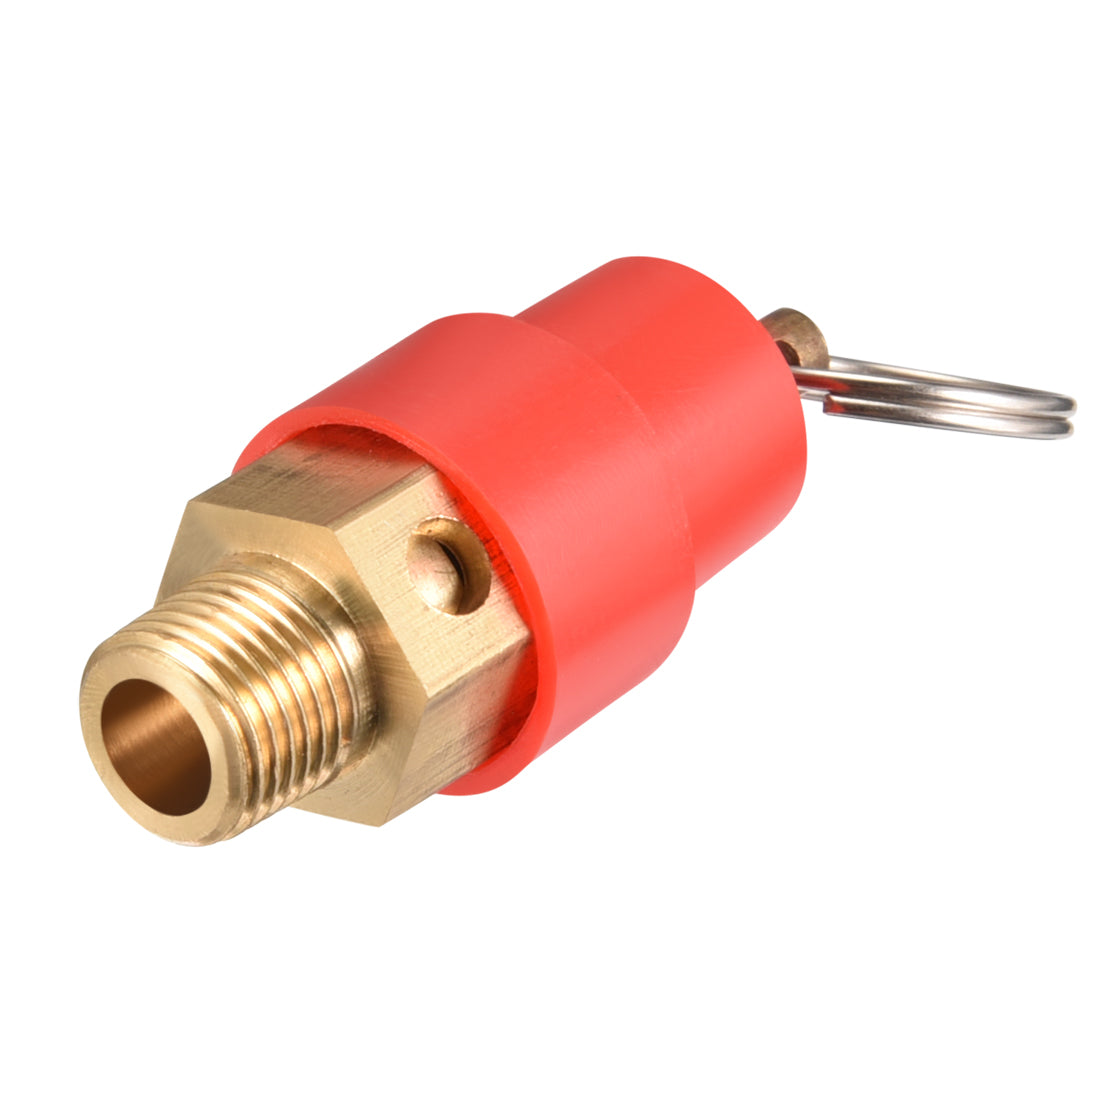 uxcell Uxcell Air Compressor Fittings Pressure Relief Valve 1/8PT Thread 0.78Mpa Red